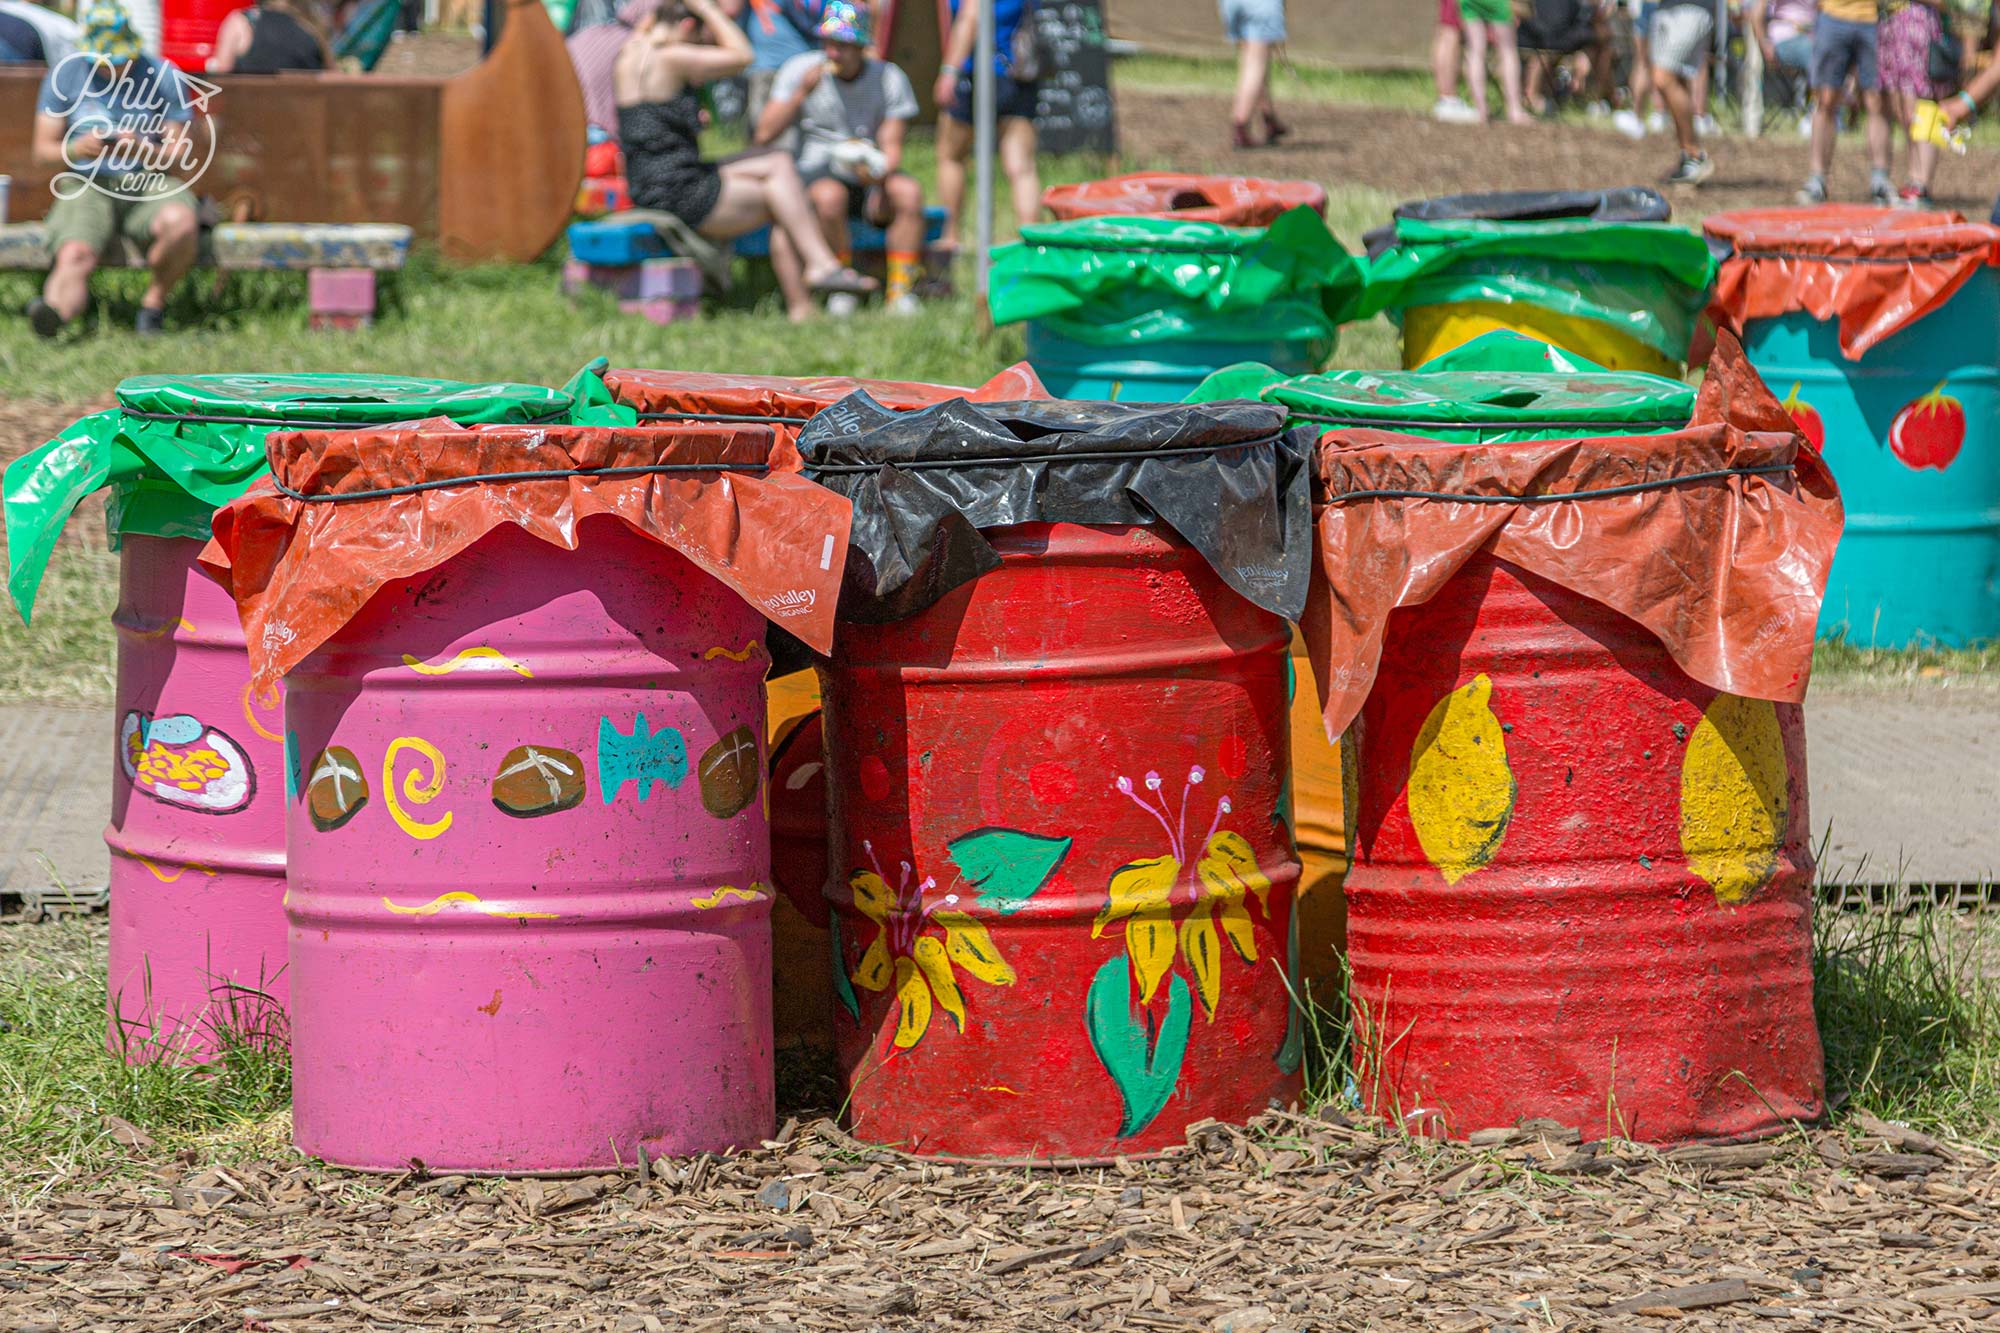 Glastonbury's 17,000 oil drum bins are works of art - look for ones with portraits of artists